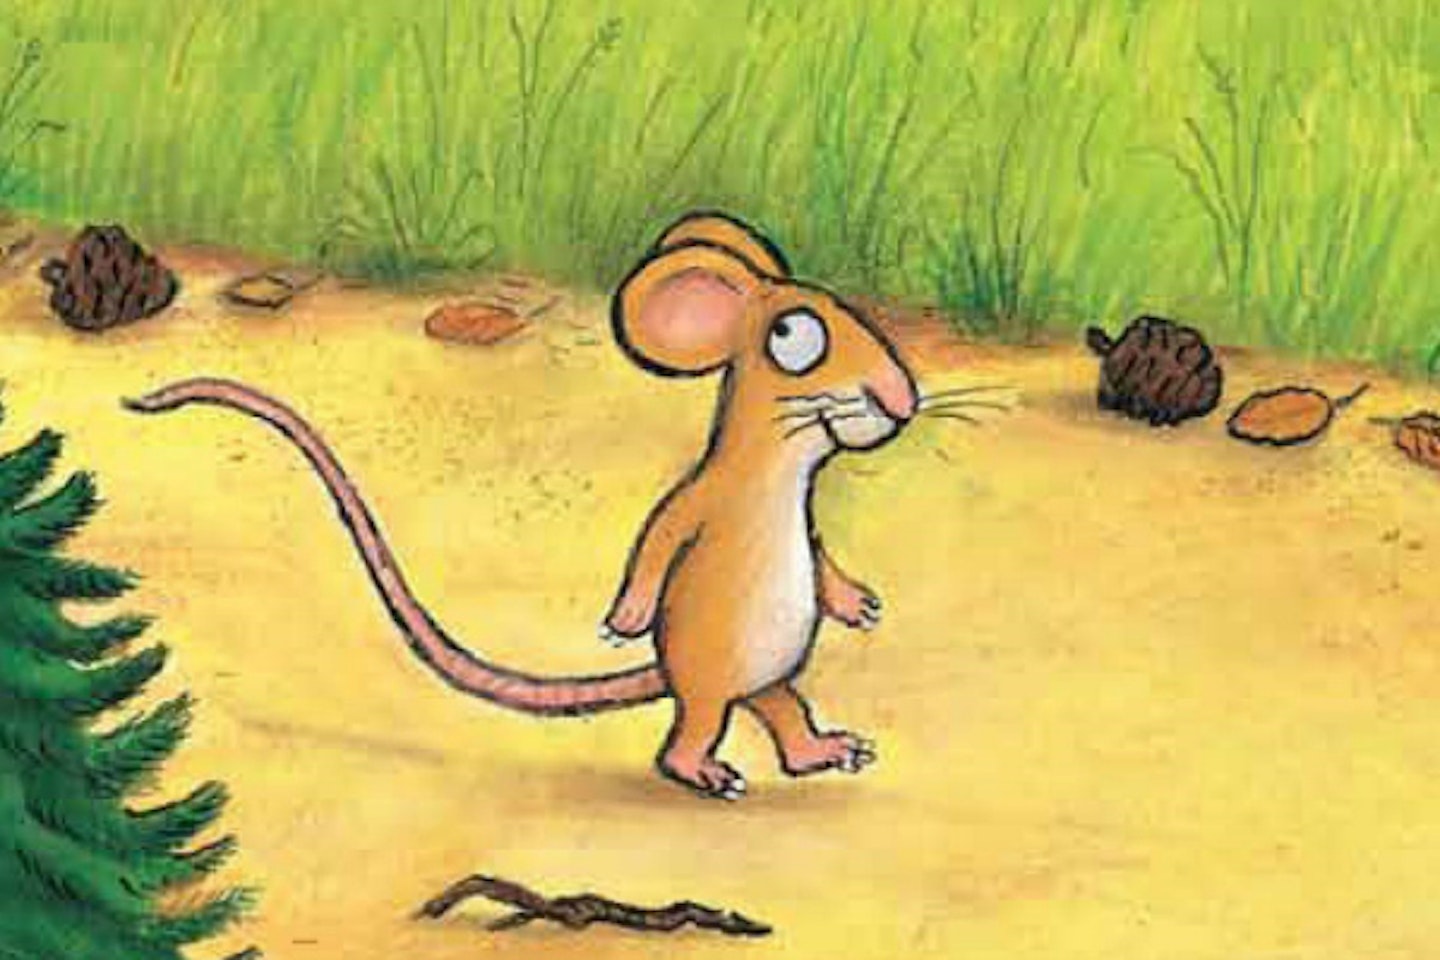 gruffalo-mouse-world-book-day-ideas-outfits-inspiration